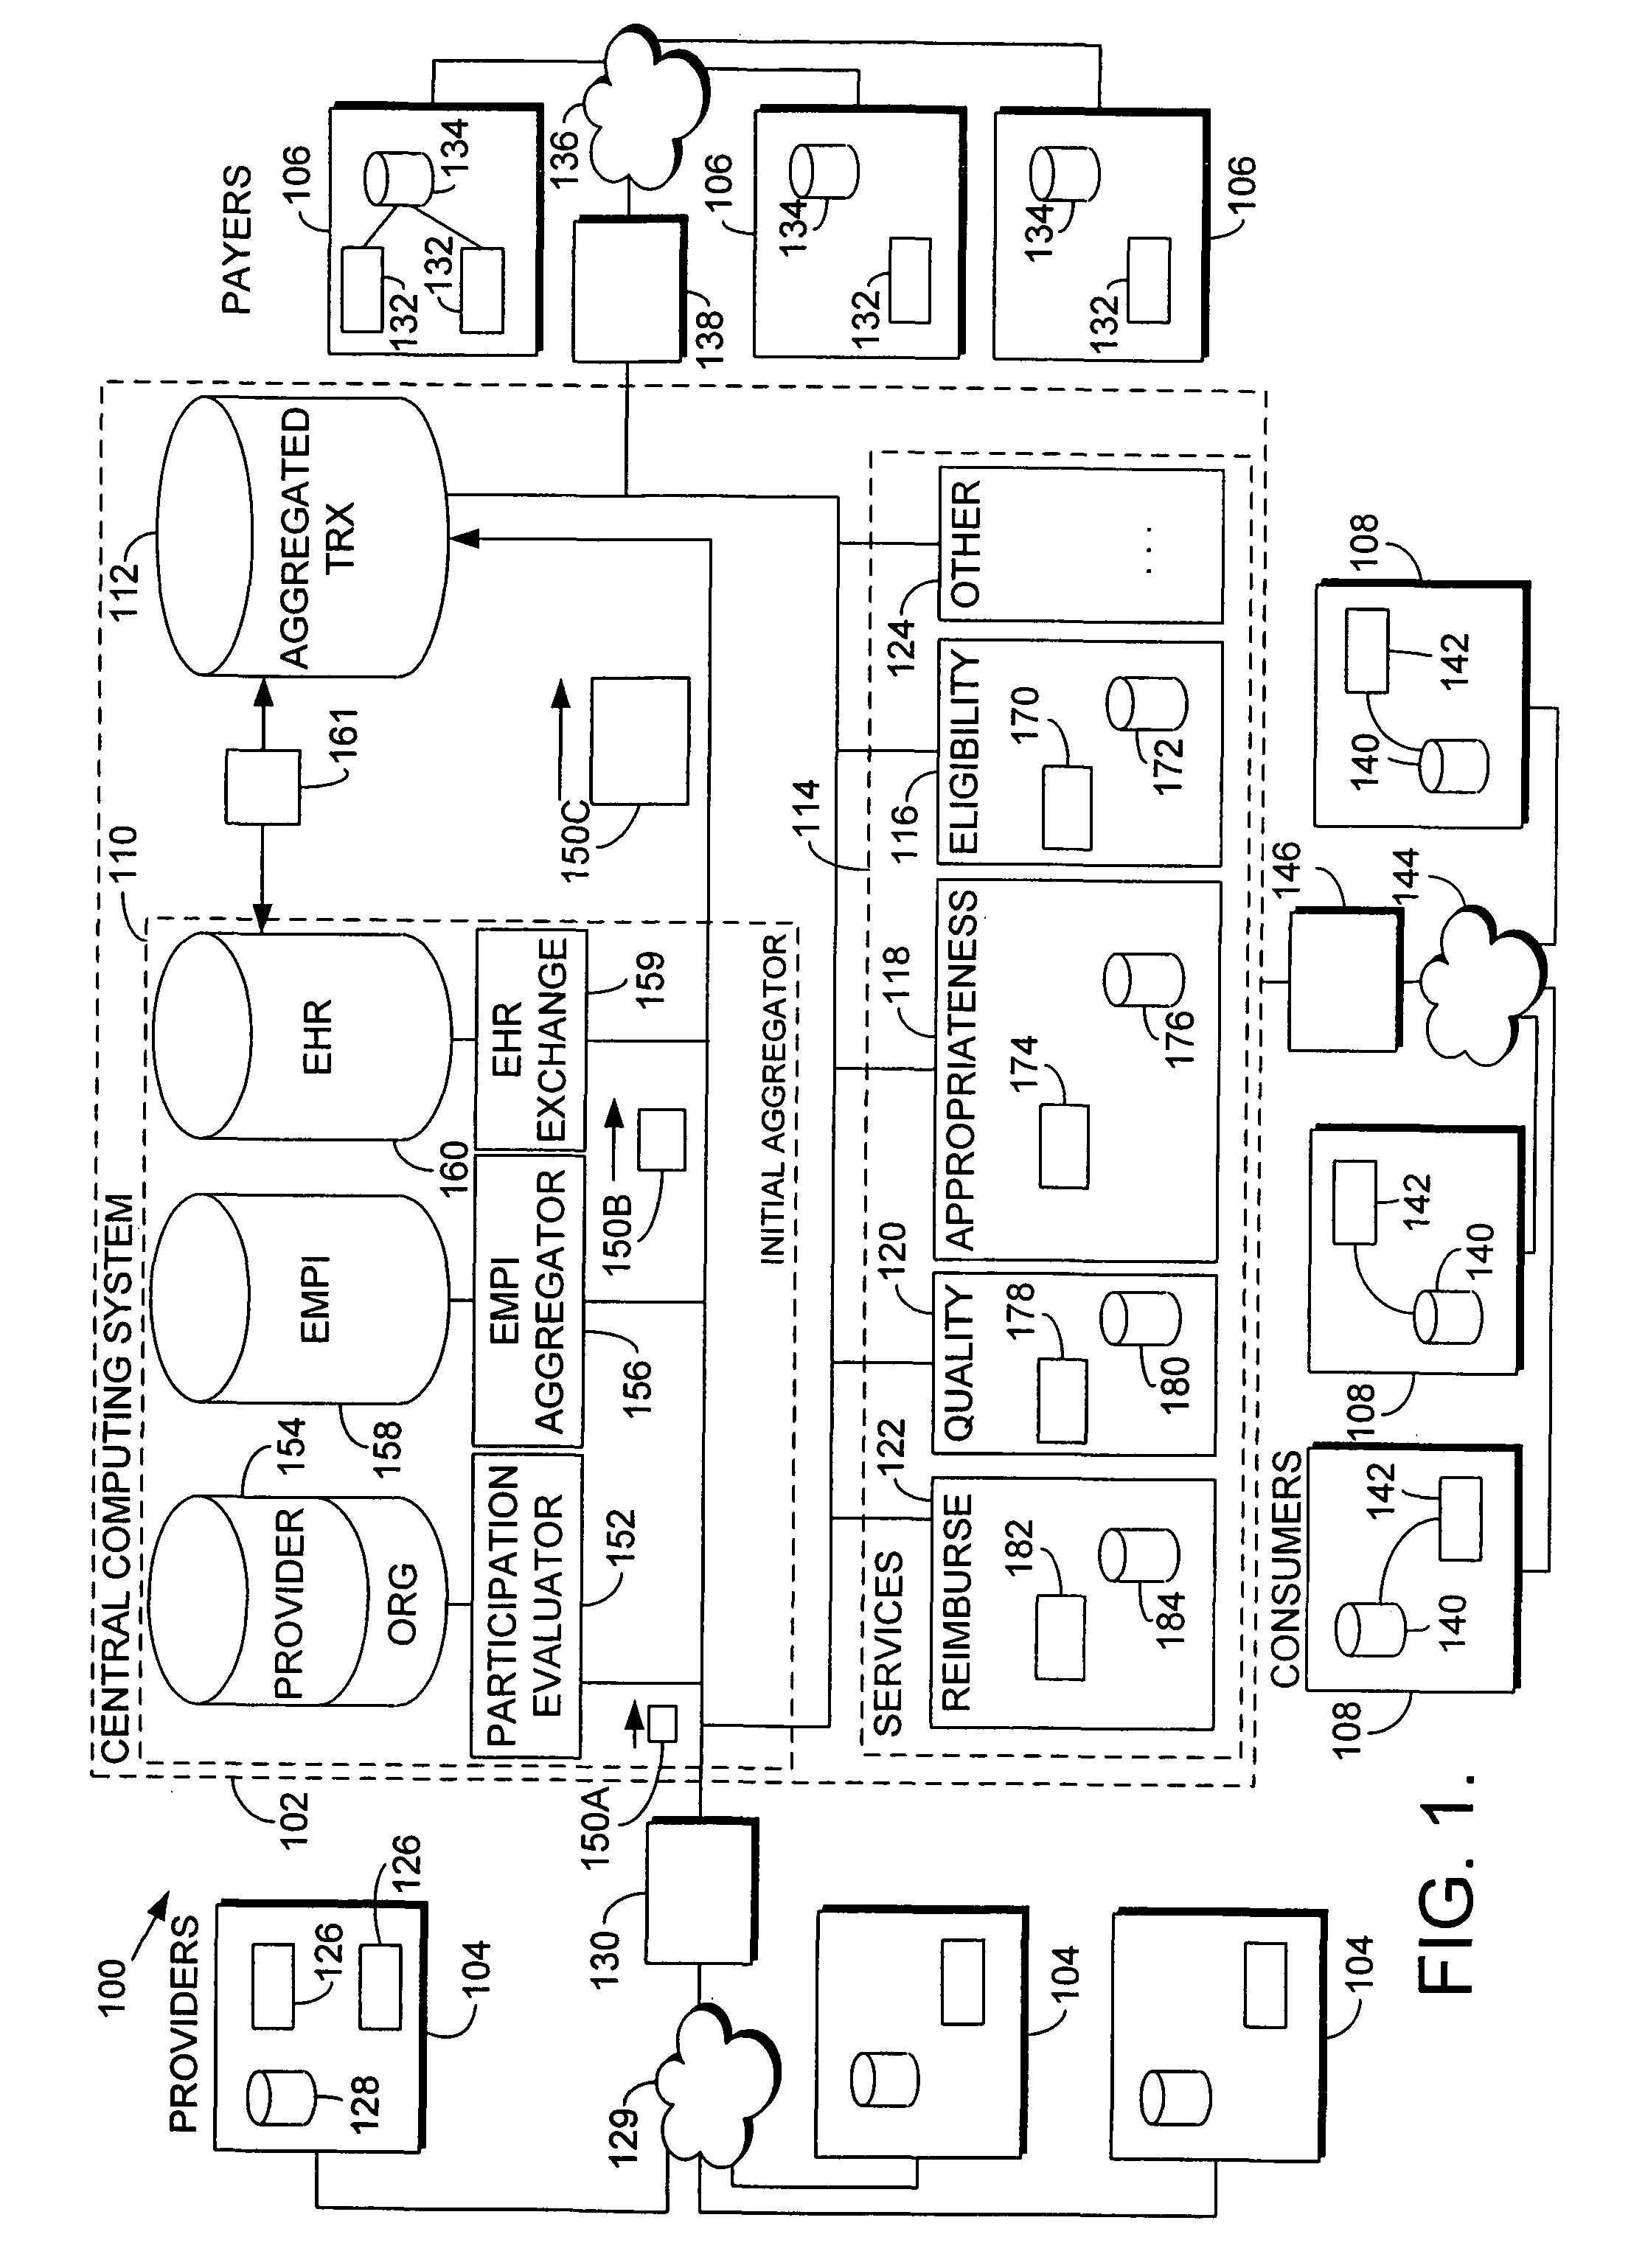 Computerized system and methods of adjudicating medical appropriateness